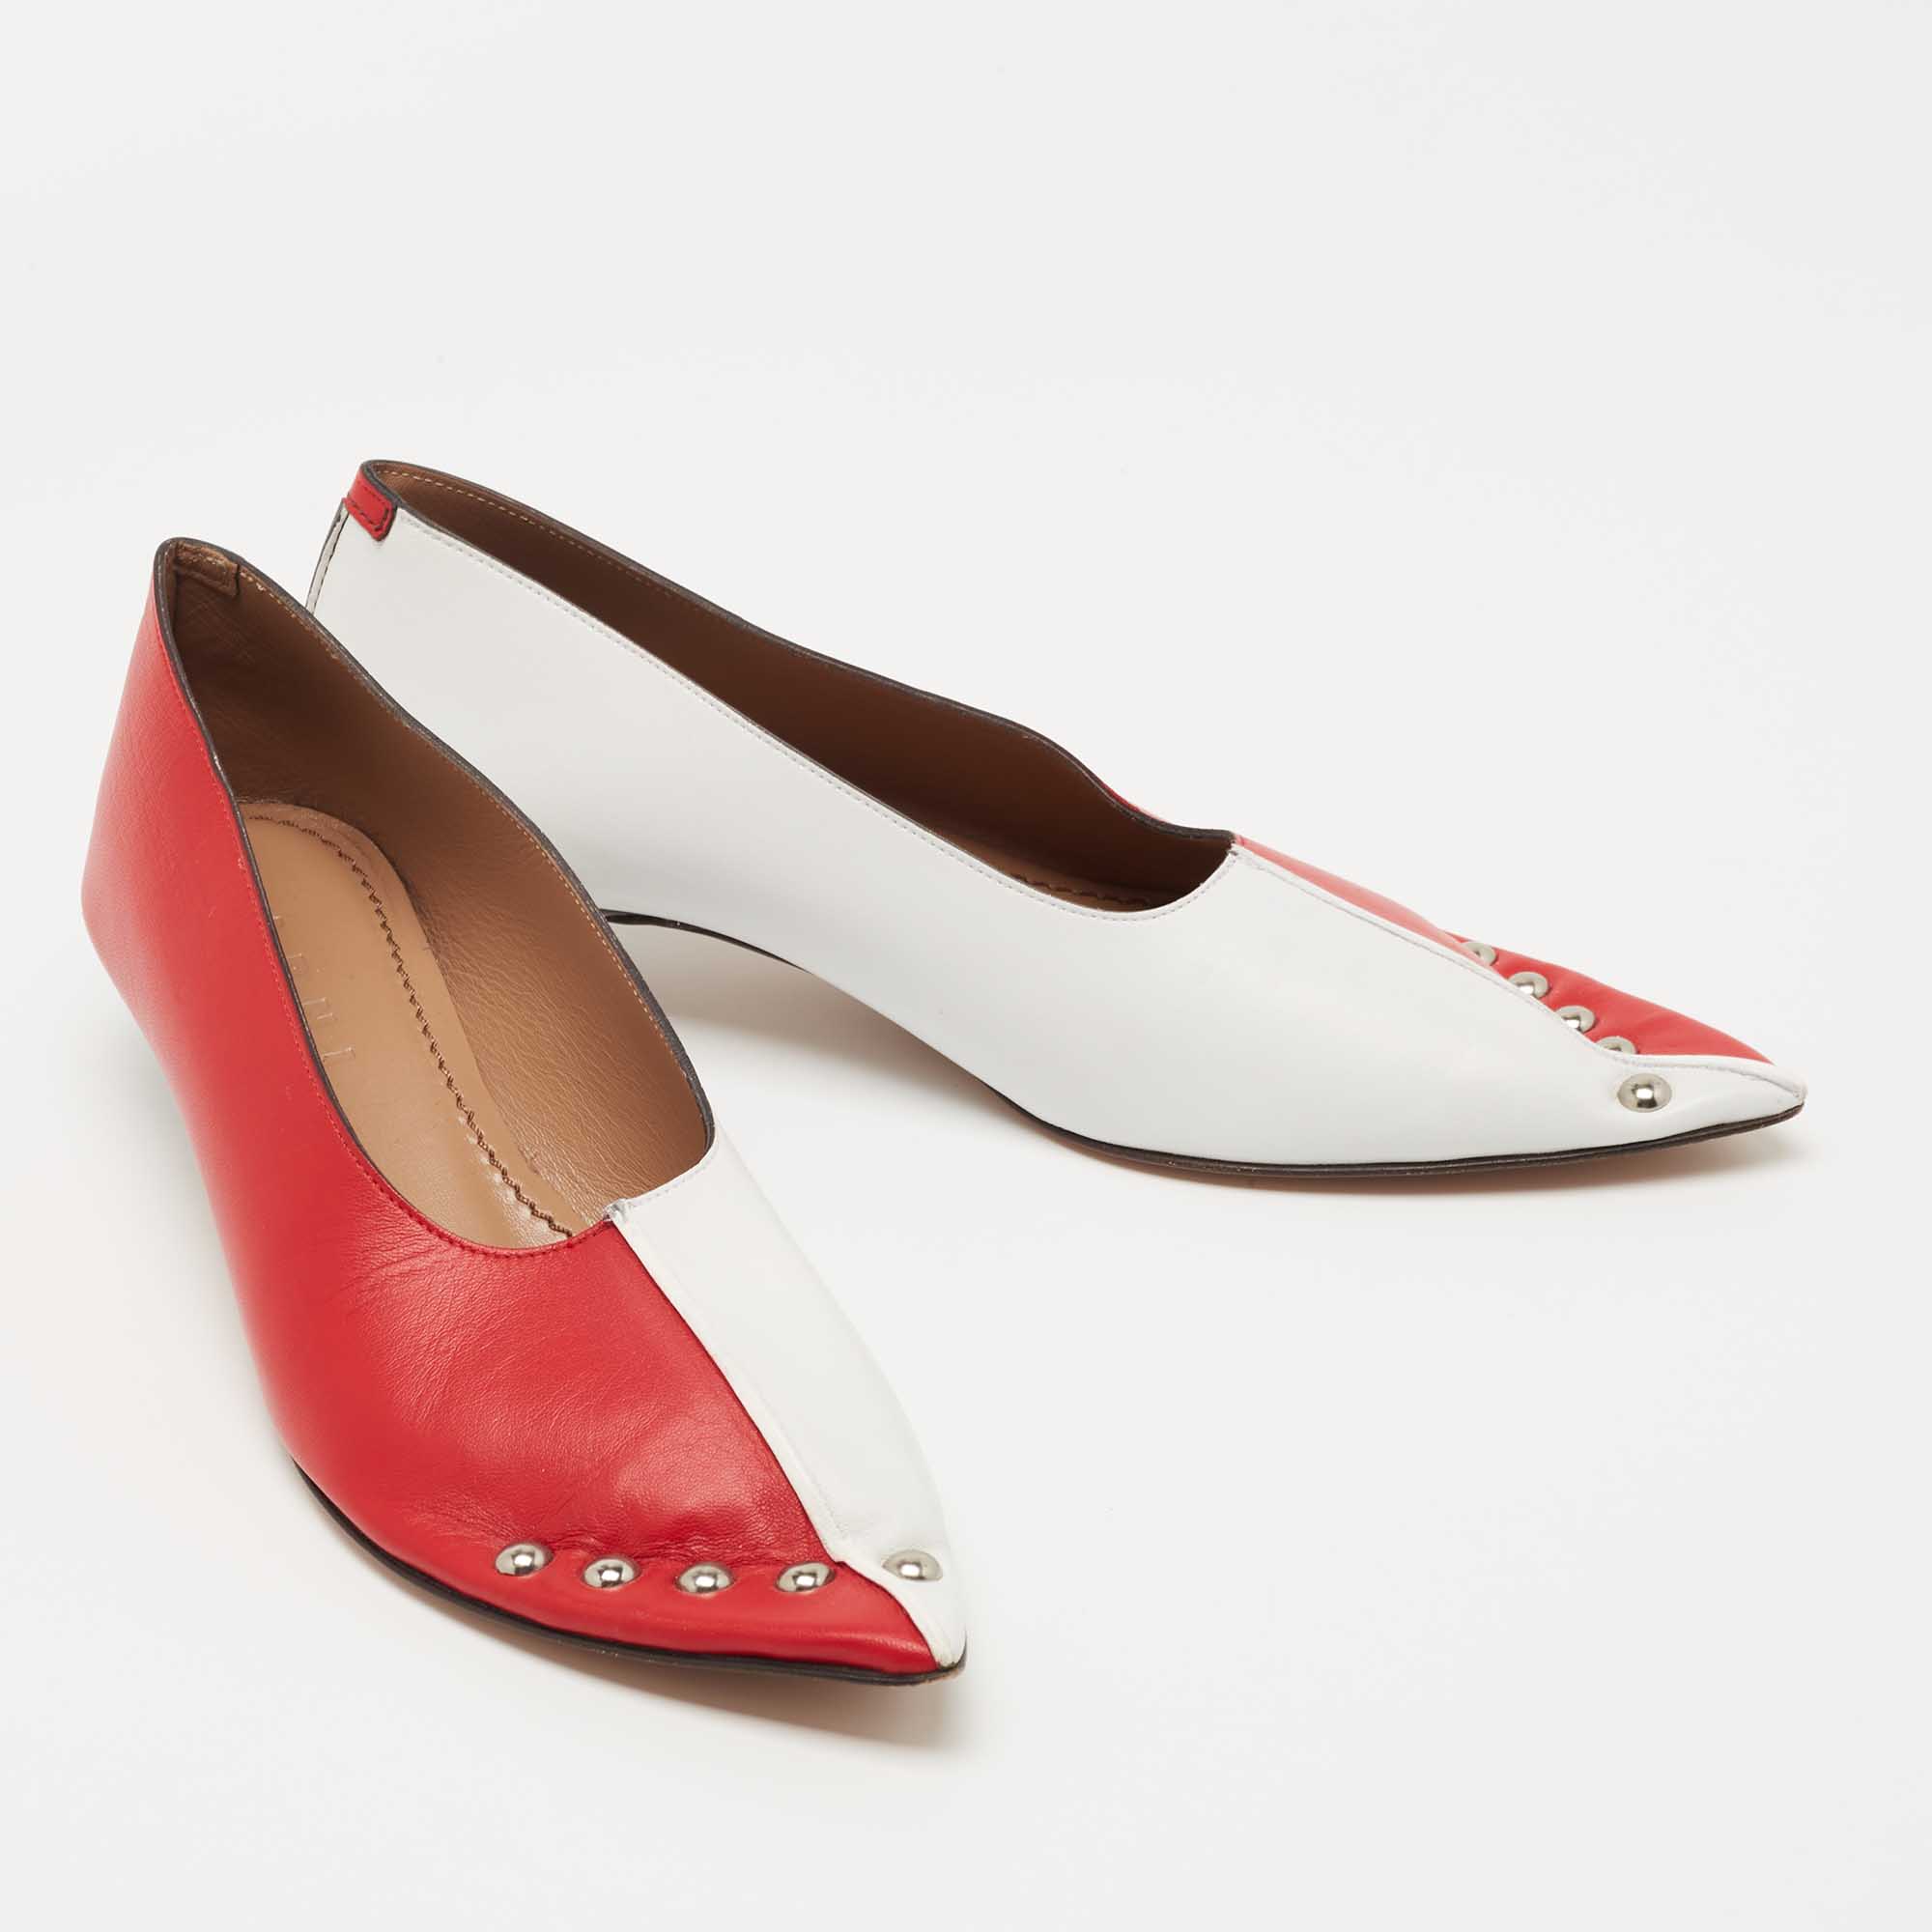 Marni Red/ White Leather Pointed Toe Pumps Size 35.5